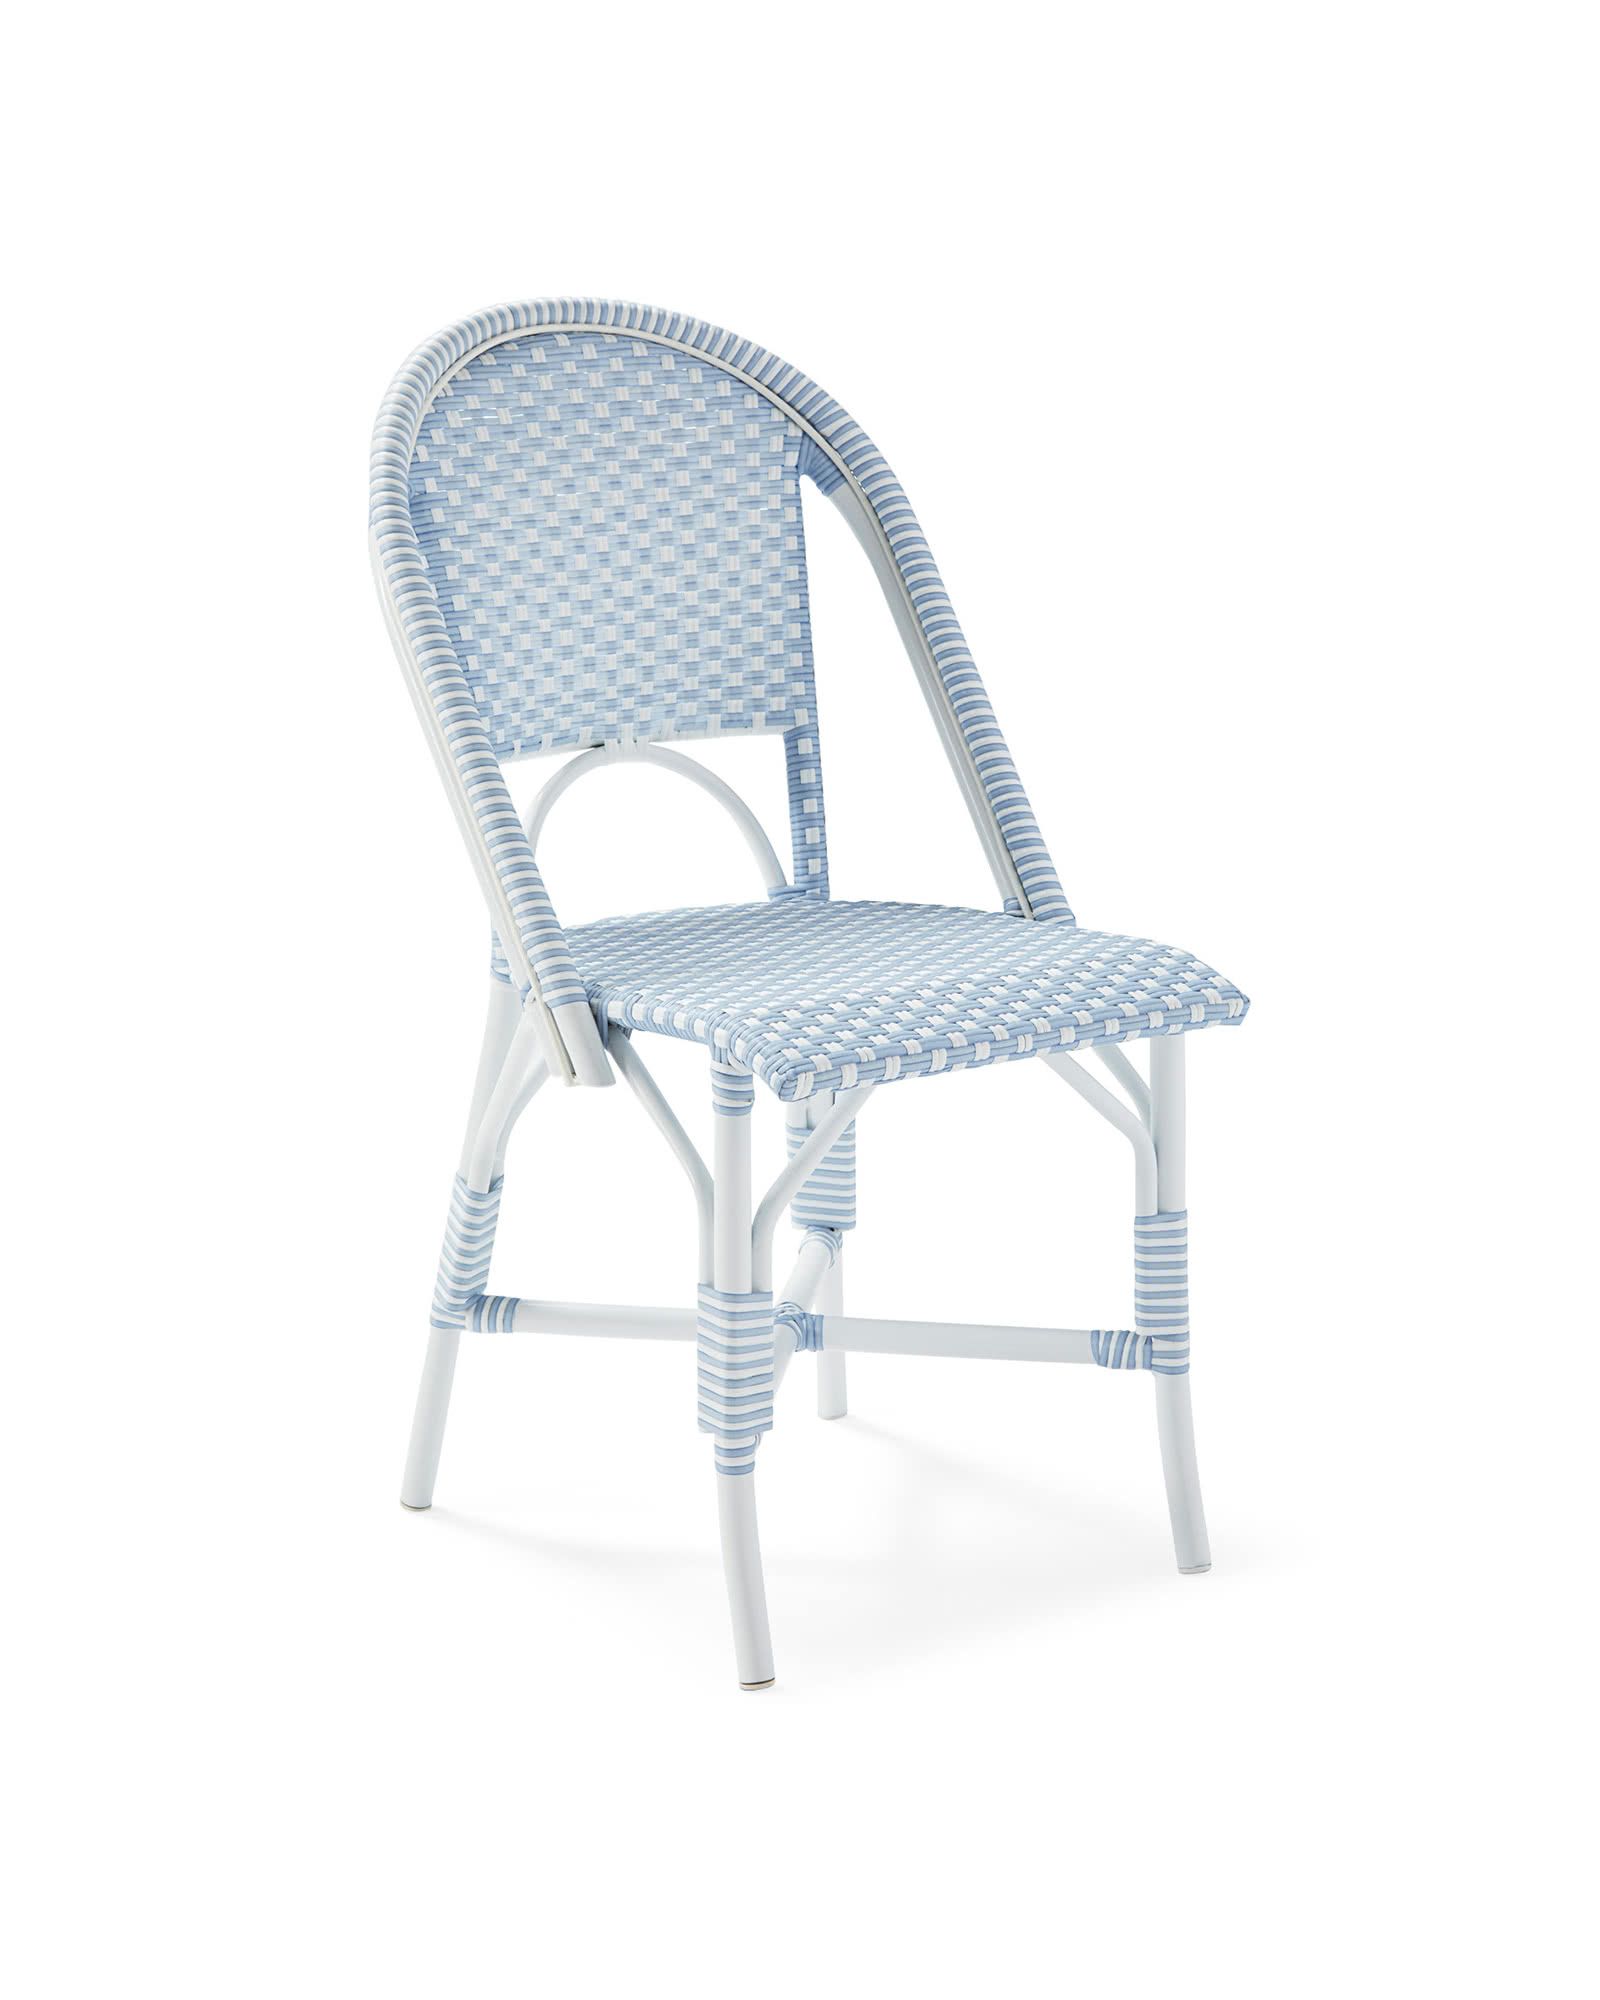 Outdoor Riviera Side Chair
        CH366-01 | Serena and Lily